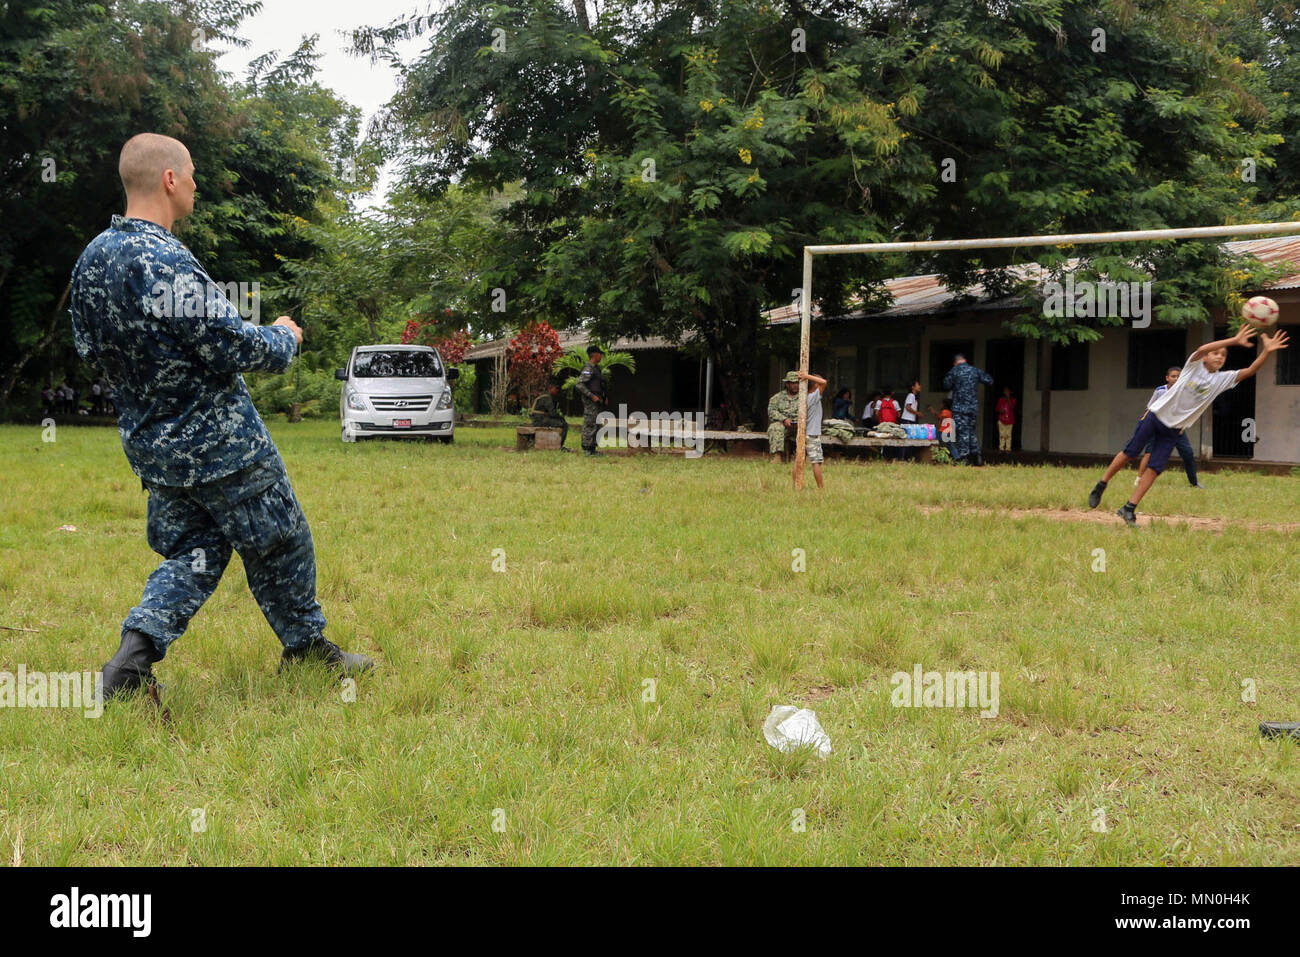 170804-A-QE286-409 TARROS, Honduras (Aug. 4, 2017) U.S. Navy Lt. Cmdr. Ian Sutherland, technical director for the Navy Entomology Center of Excellence, plays soccer with Honduran elementary school students at Escuela Rural Mixta Luz Infantil, during a Southern Partnership Station 17 community relations (COMREL) project. SPS-EPF 17 is a U.S. Navy deployment, executed by U.S. Naval Forces Southern Command/U.S. 4th Fleet, focused on subject matter expert exchanges with partner nation militaries and security forces in Central and South America. (U.S. Army photo by SPC Judge Jones/Released) Stock Photo